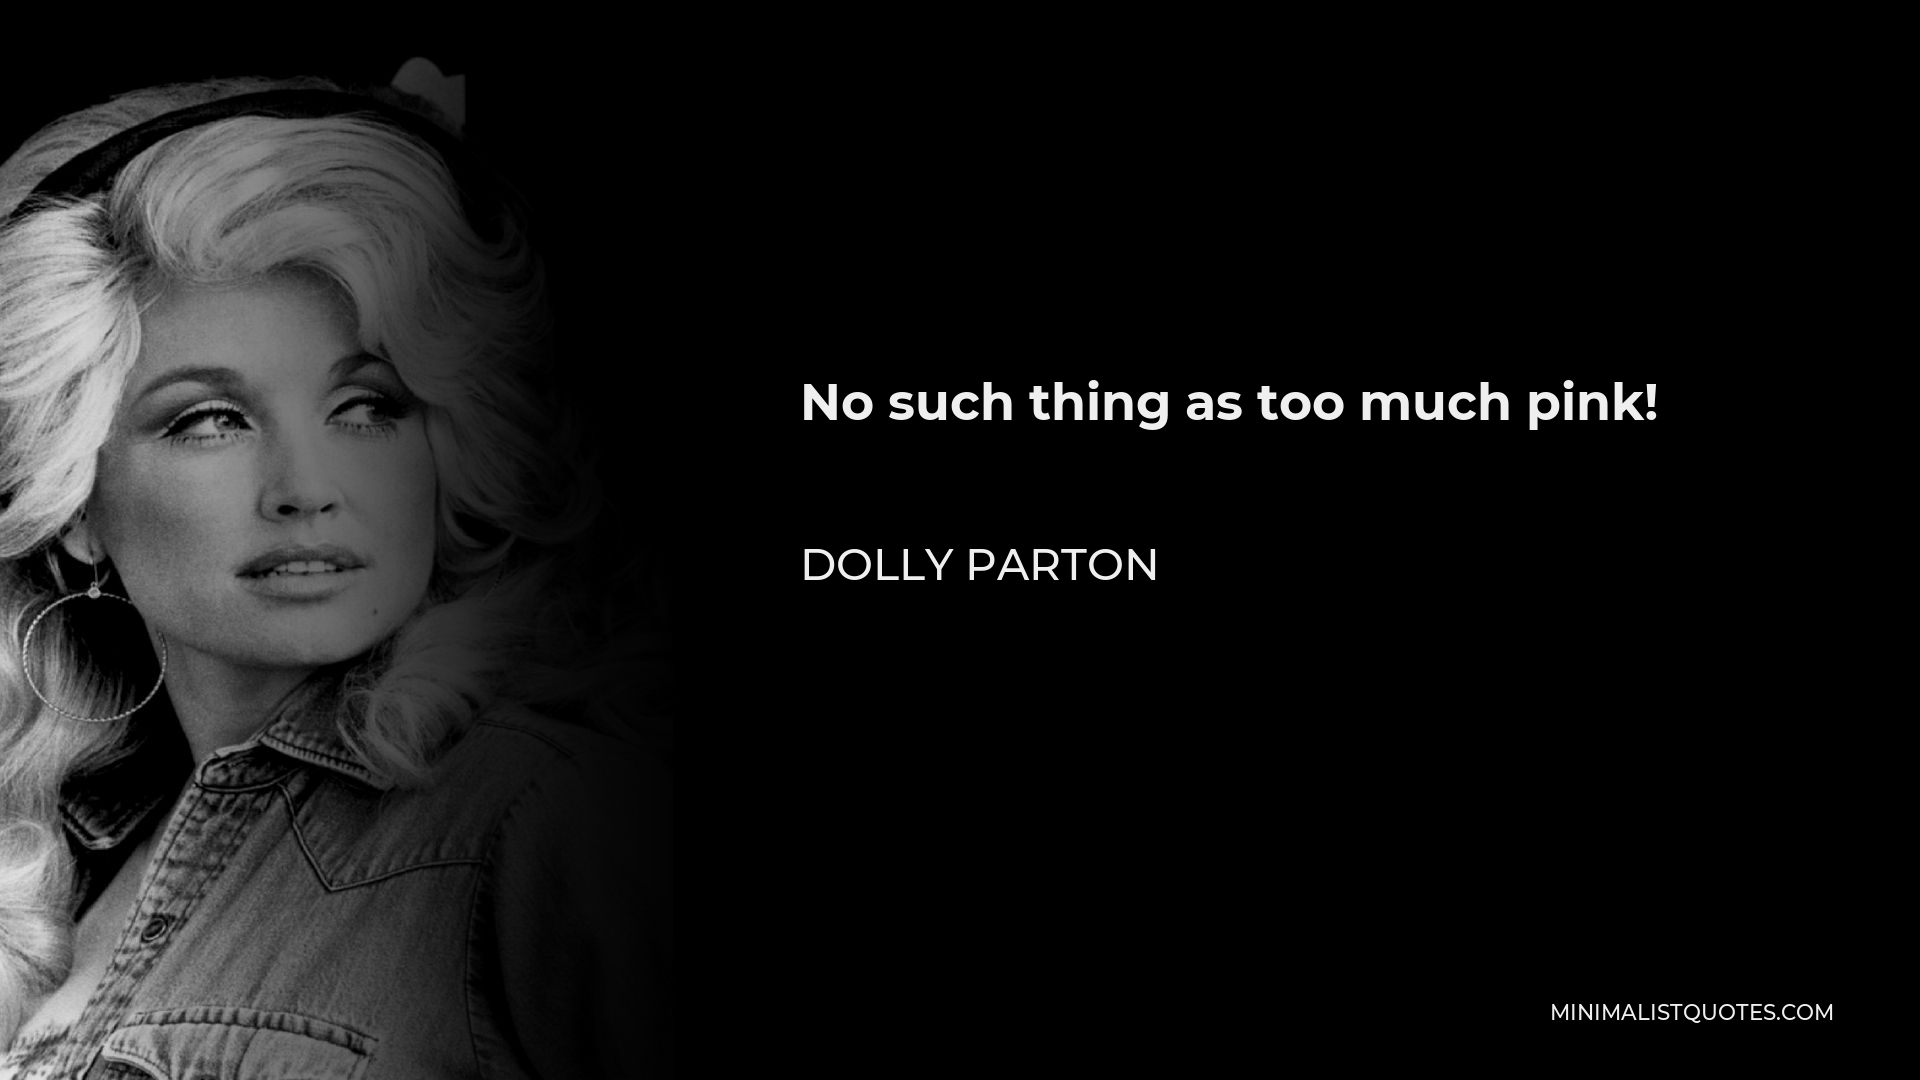 Dolly Parton Quote - No such thing as too much pink!